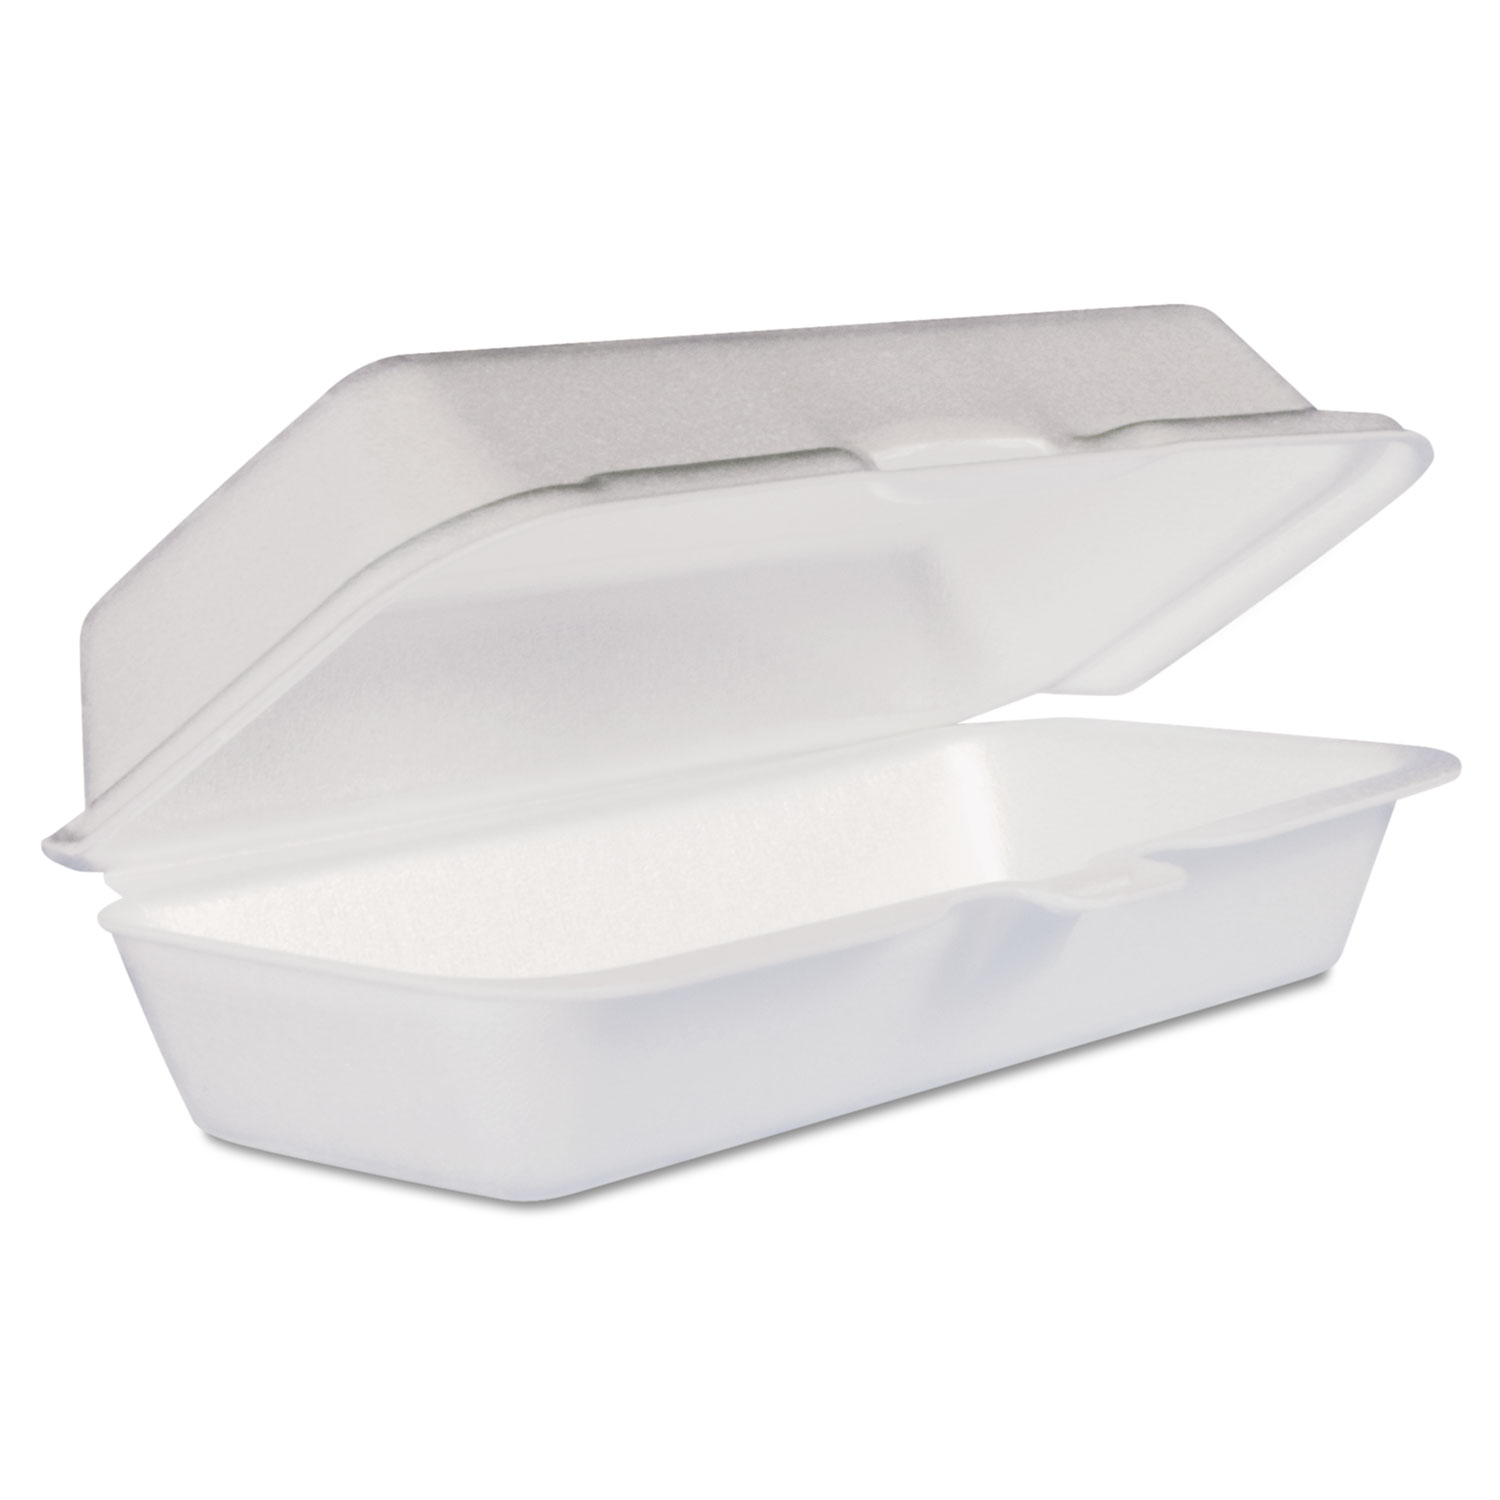 Foam Hot Dog Container with Hinged Lid, 7-1/10 x 3-4/5 x 2-3/10, White, 125/Bag